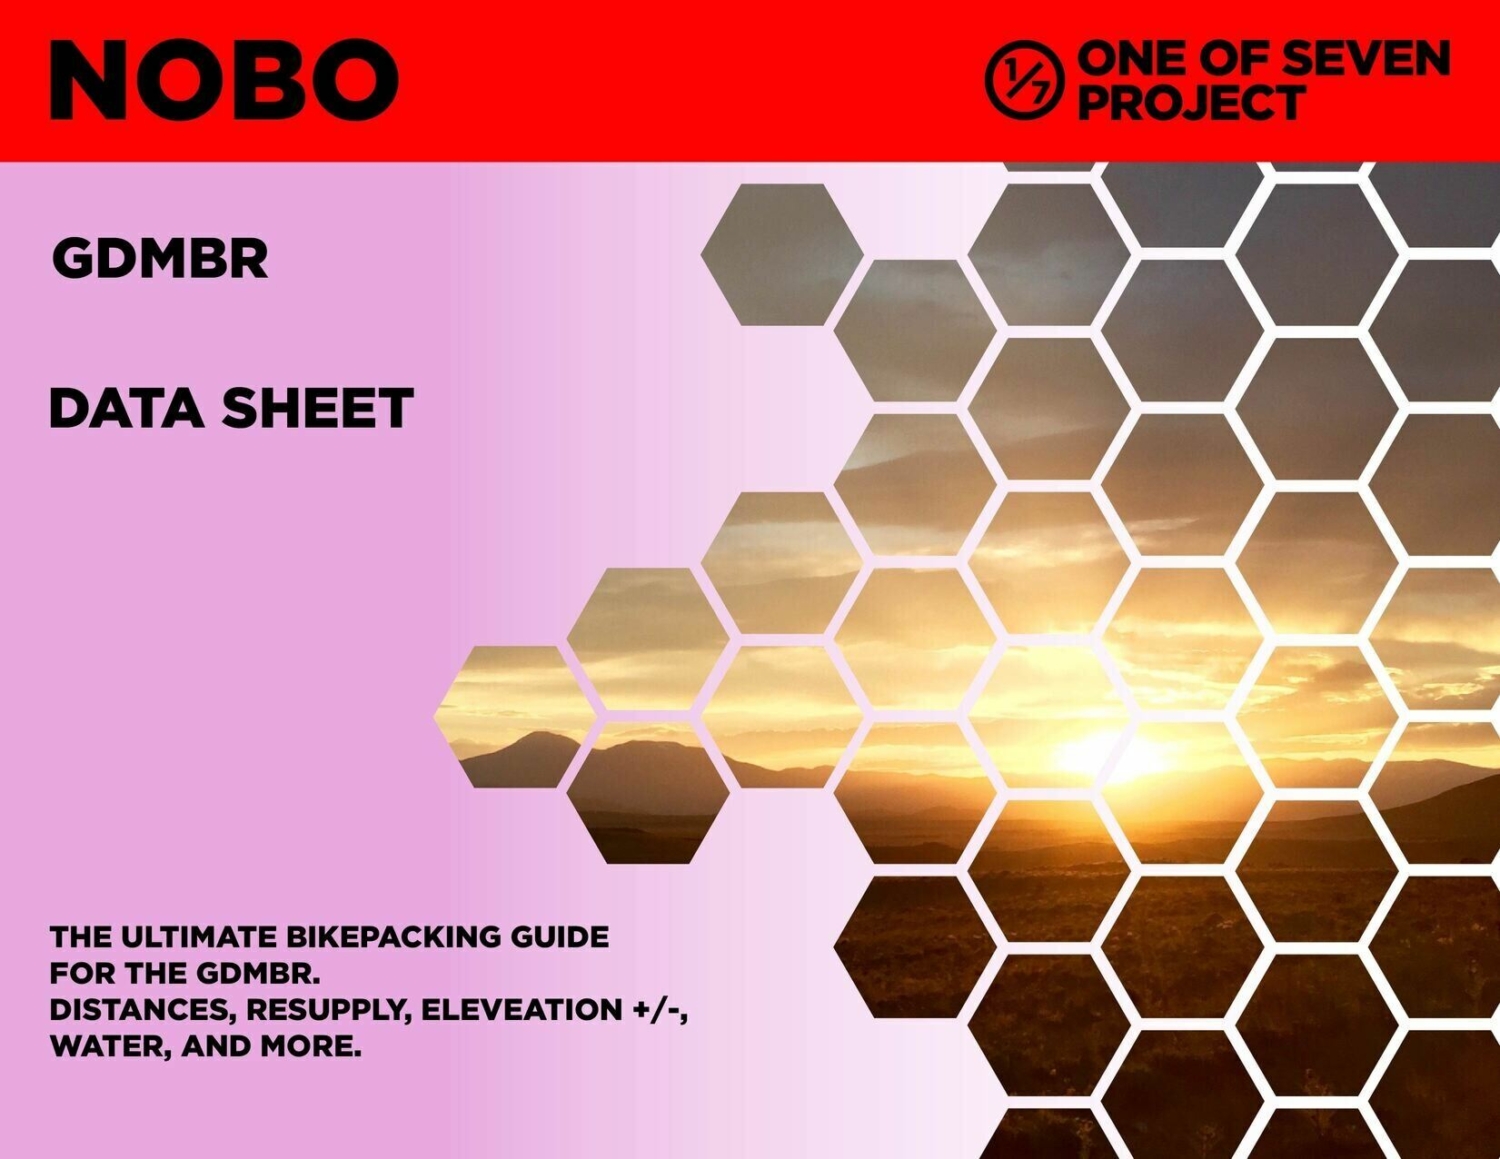 GDMBR NOBO Data Sheet, planning aid, guide, bikepacking